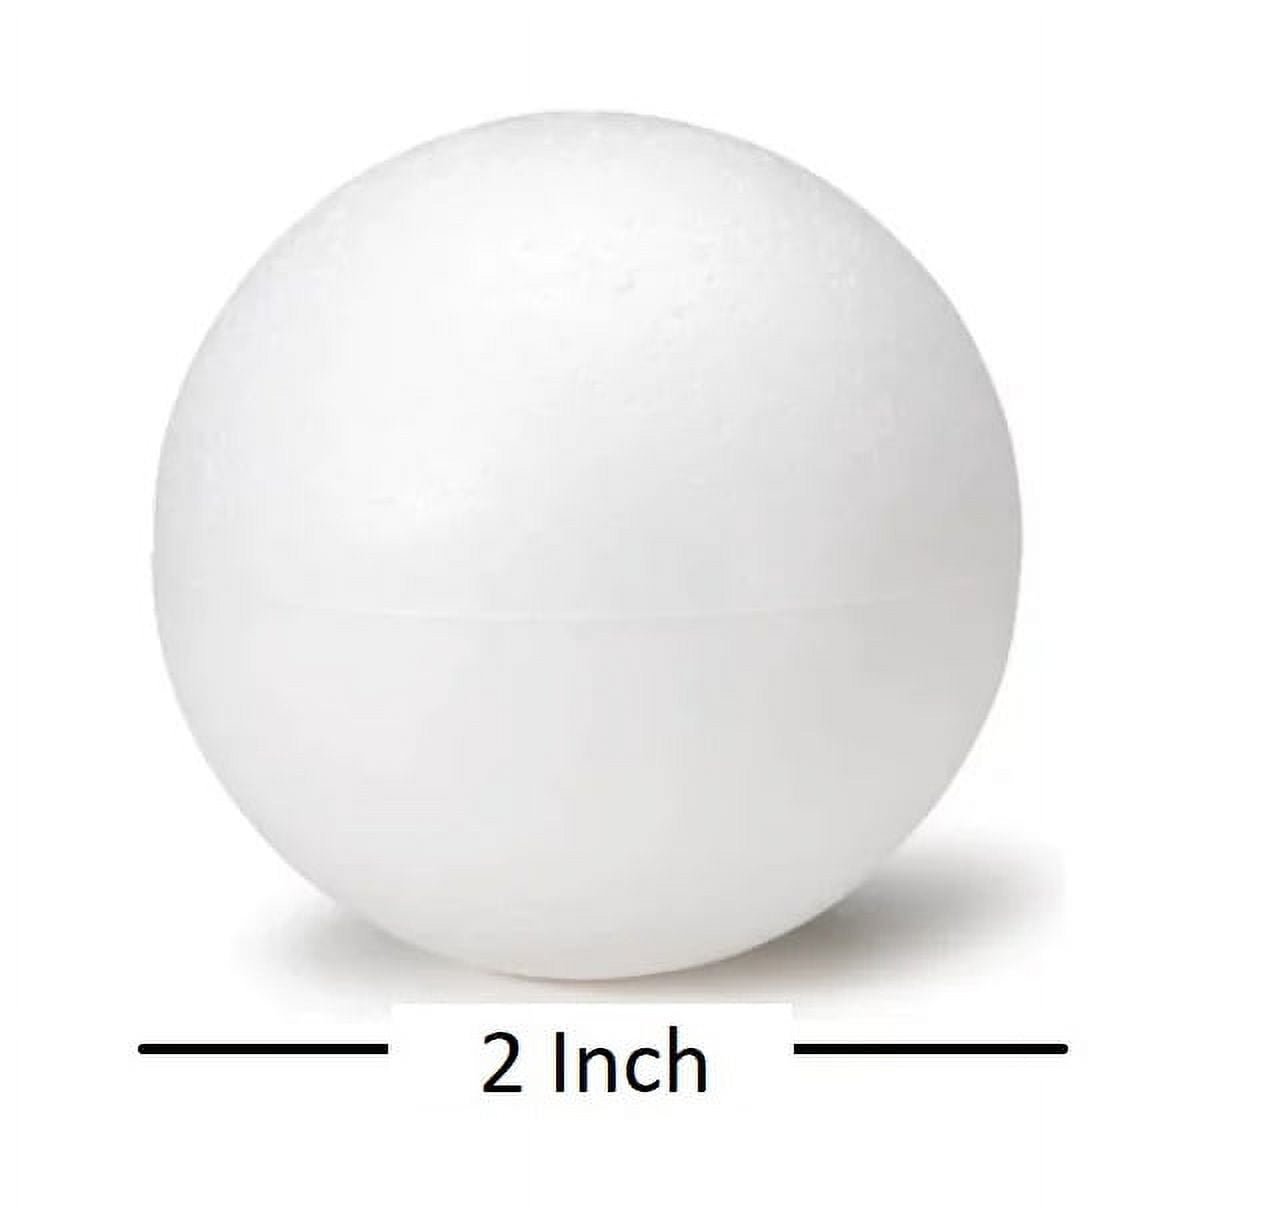 2 Inch Foam Ball Polystyrene Balls for Art & Crafts Projects